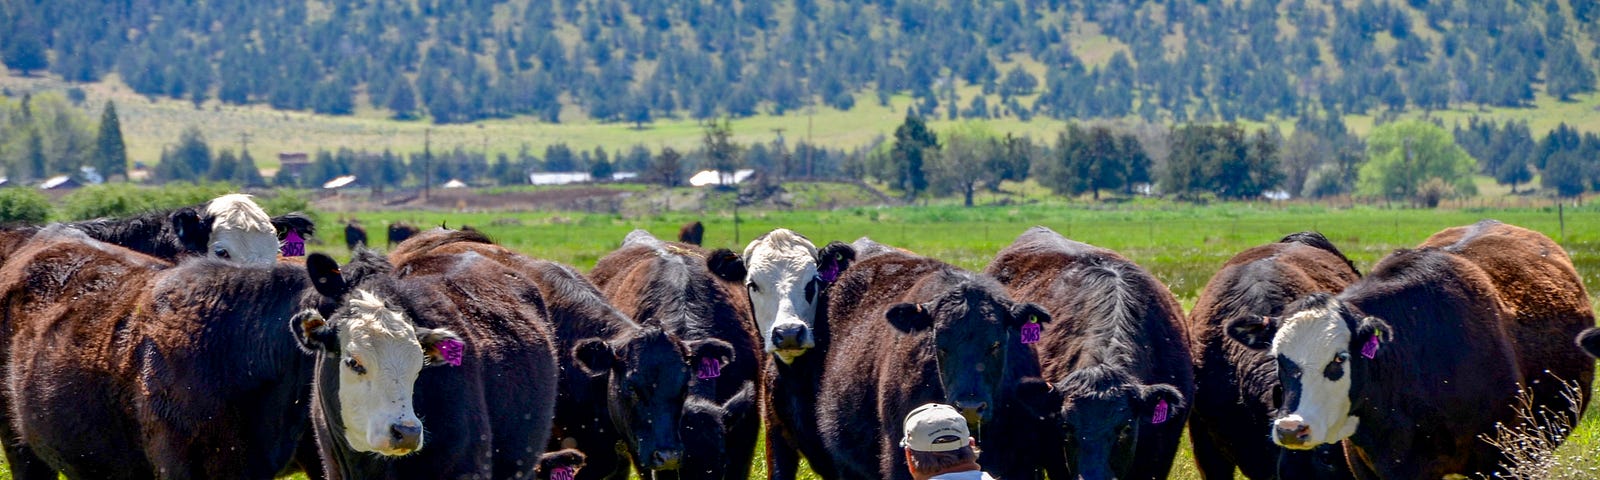 Blair Hart sits on the ground and looks up at his herd of cattle. About ten cows are in the picture, and they all are on a vibrant green landscape at the foot of a mountainside